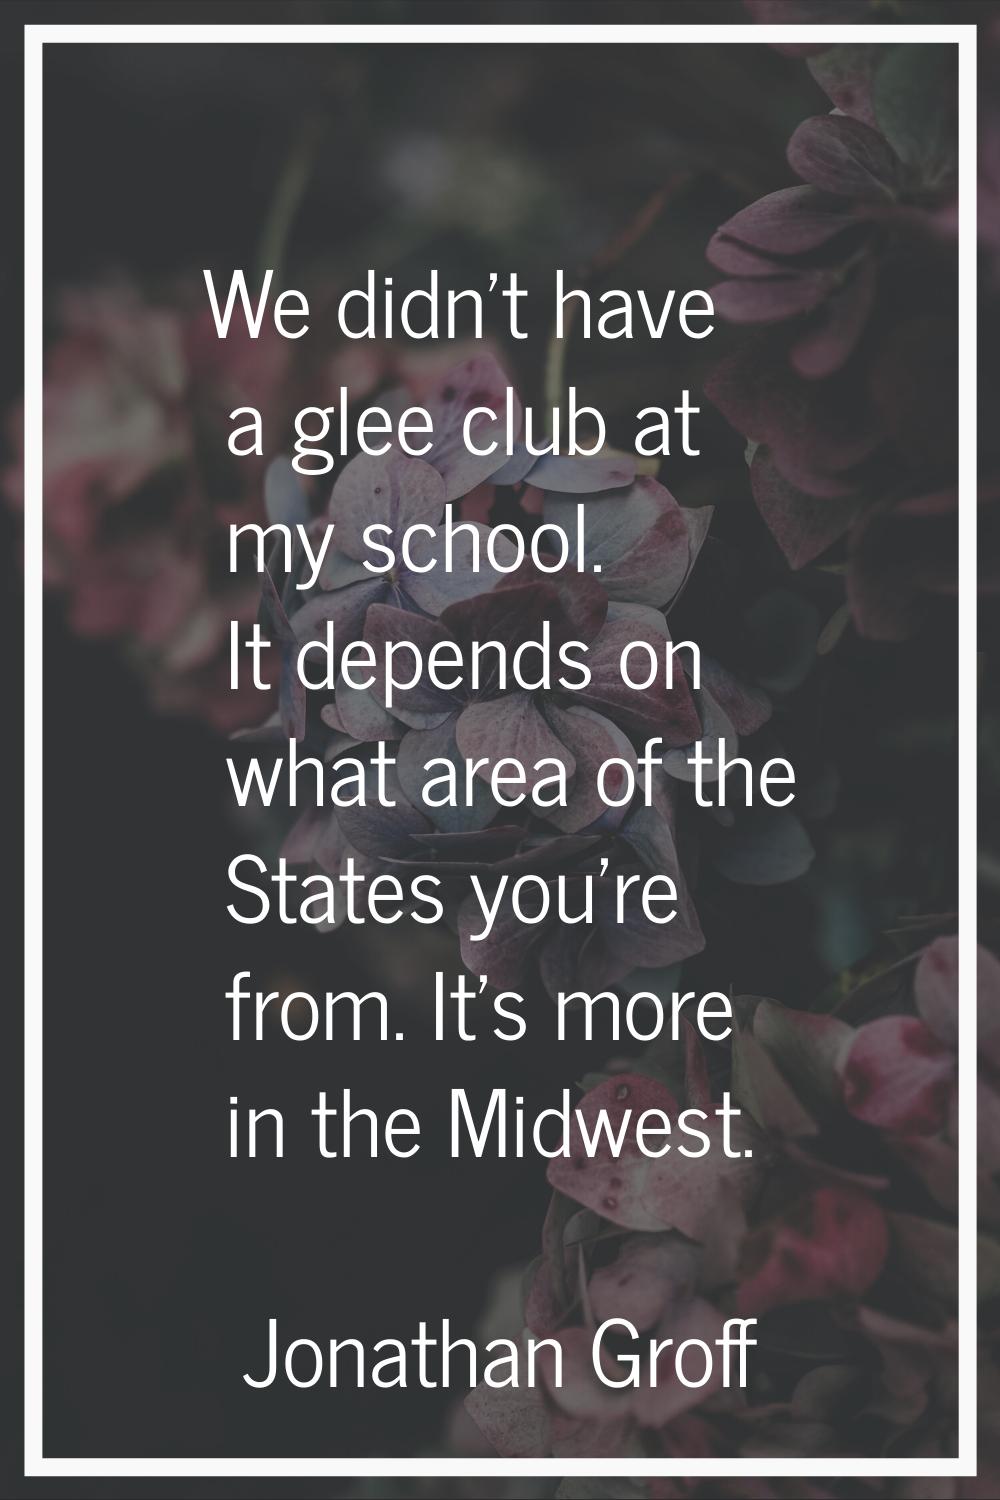 We didn't have a glee club at my school. It depends on what area of the States you're from. It's mo